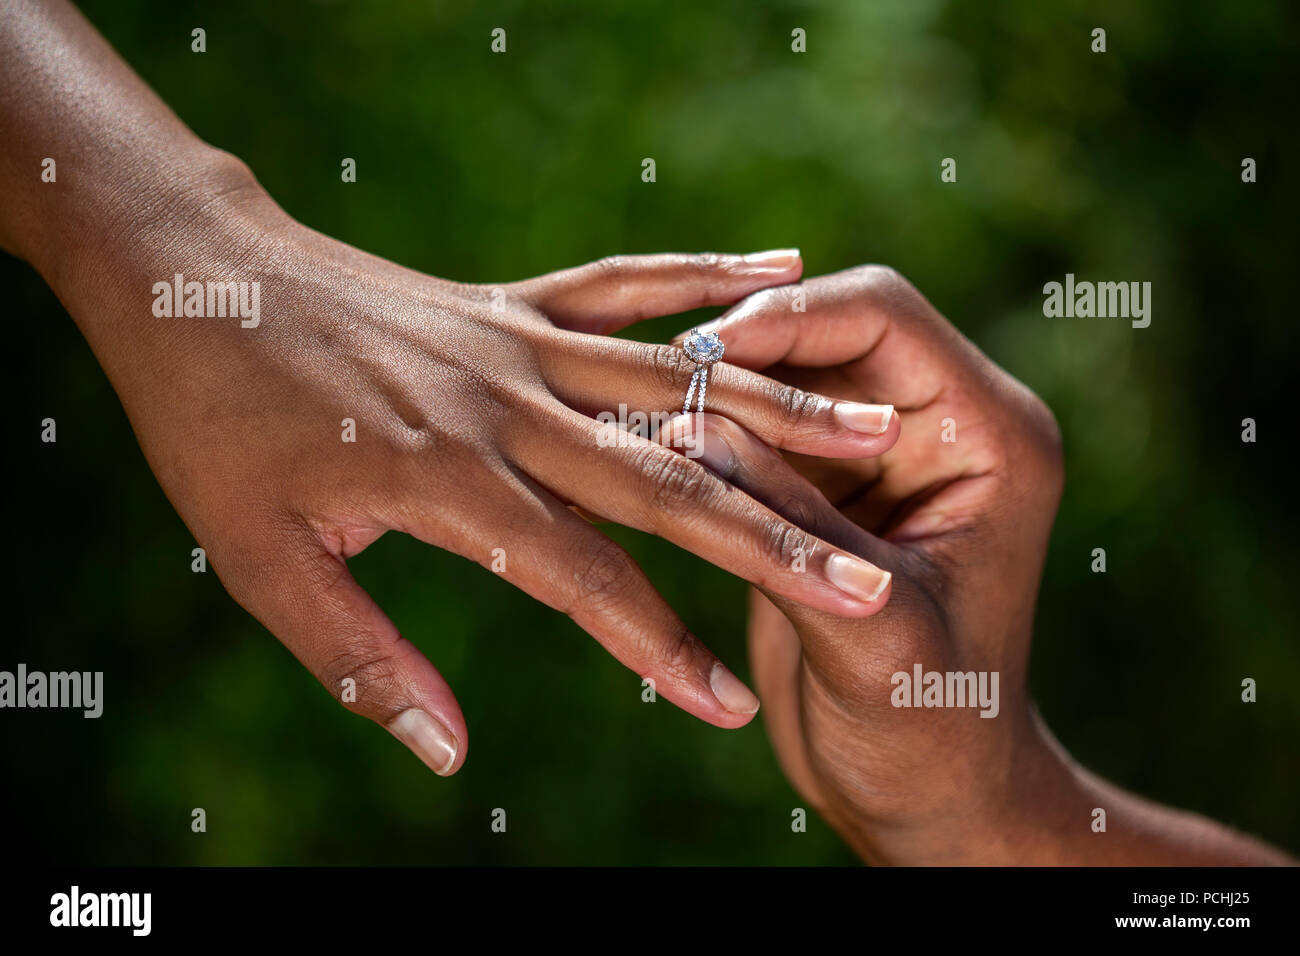 Engagement ring being put on African woman's finger Stock Photo